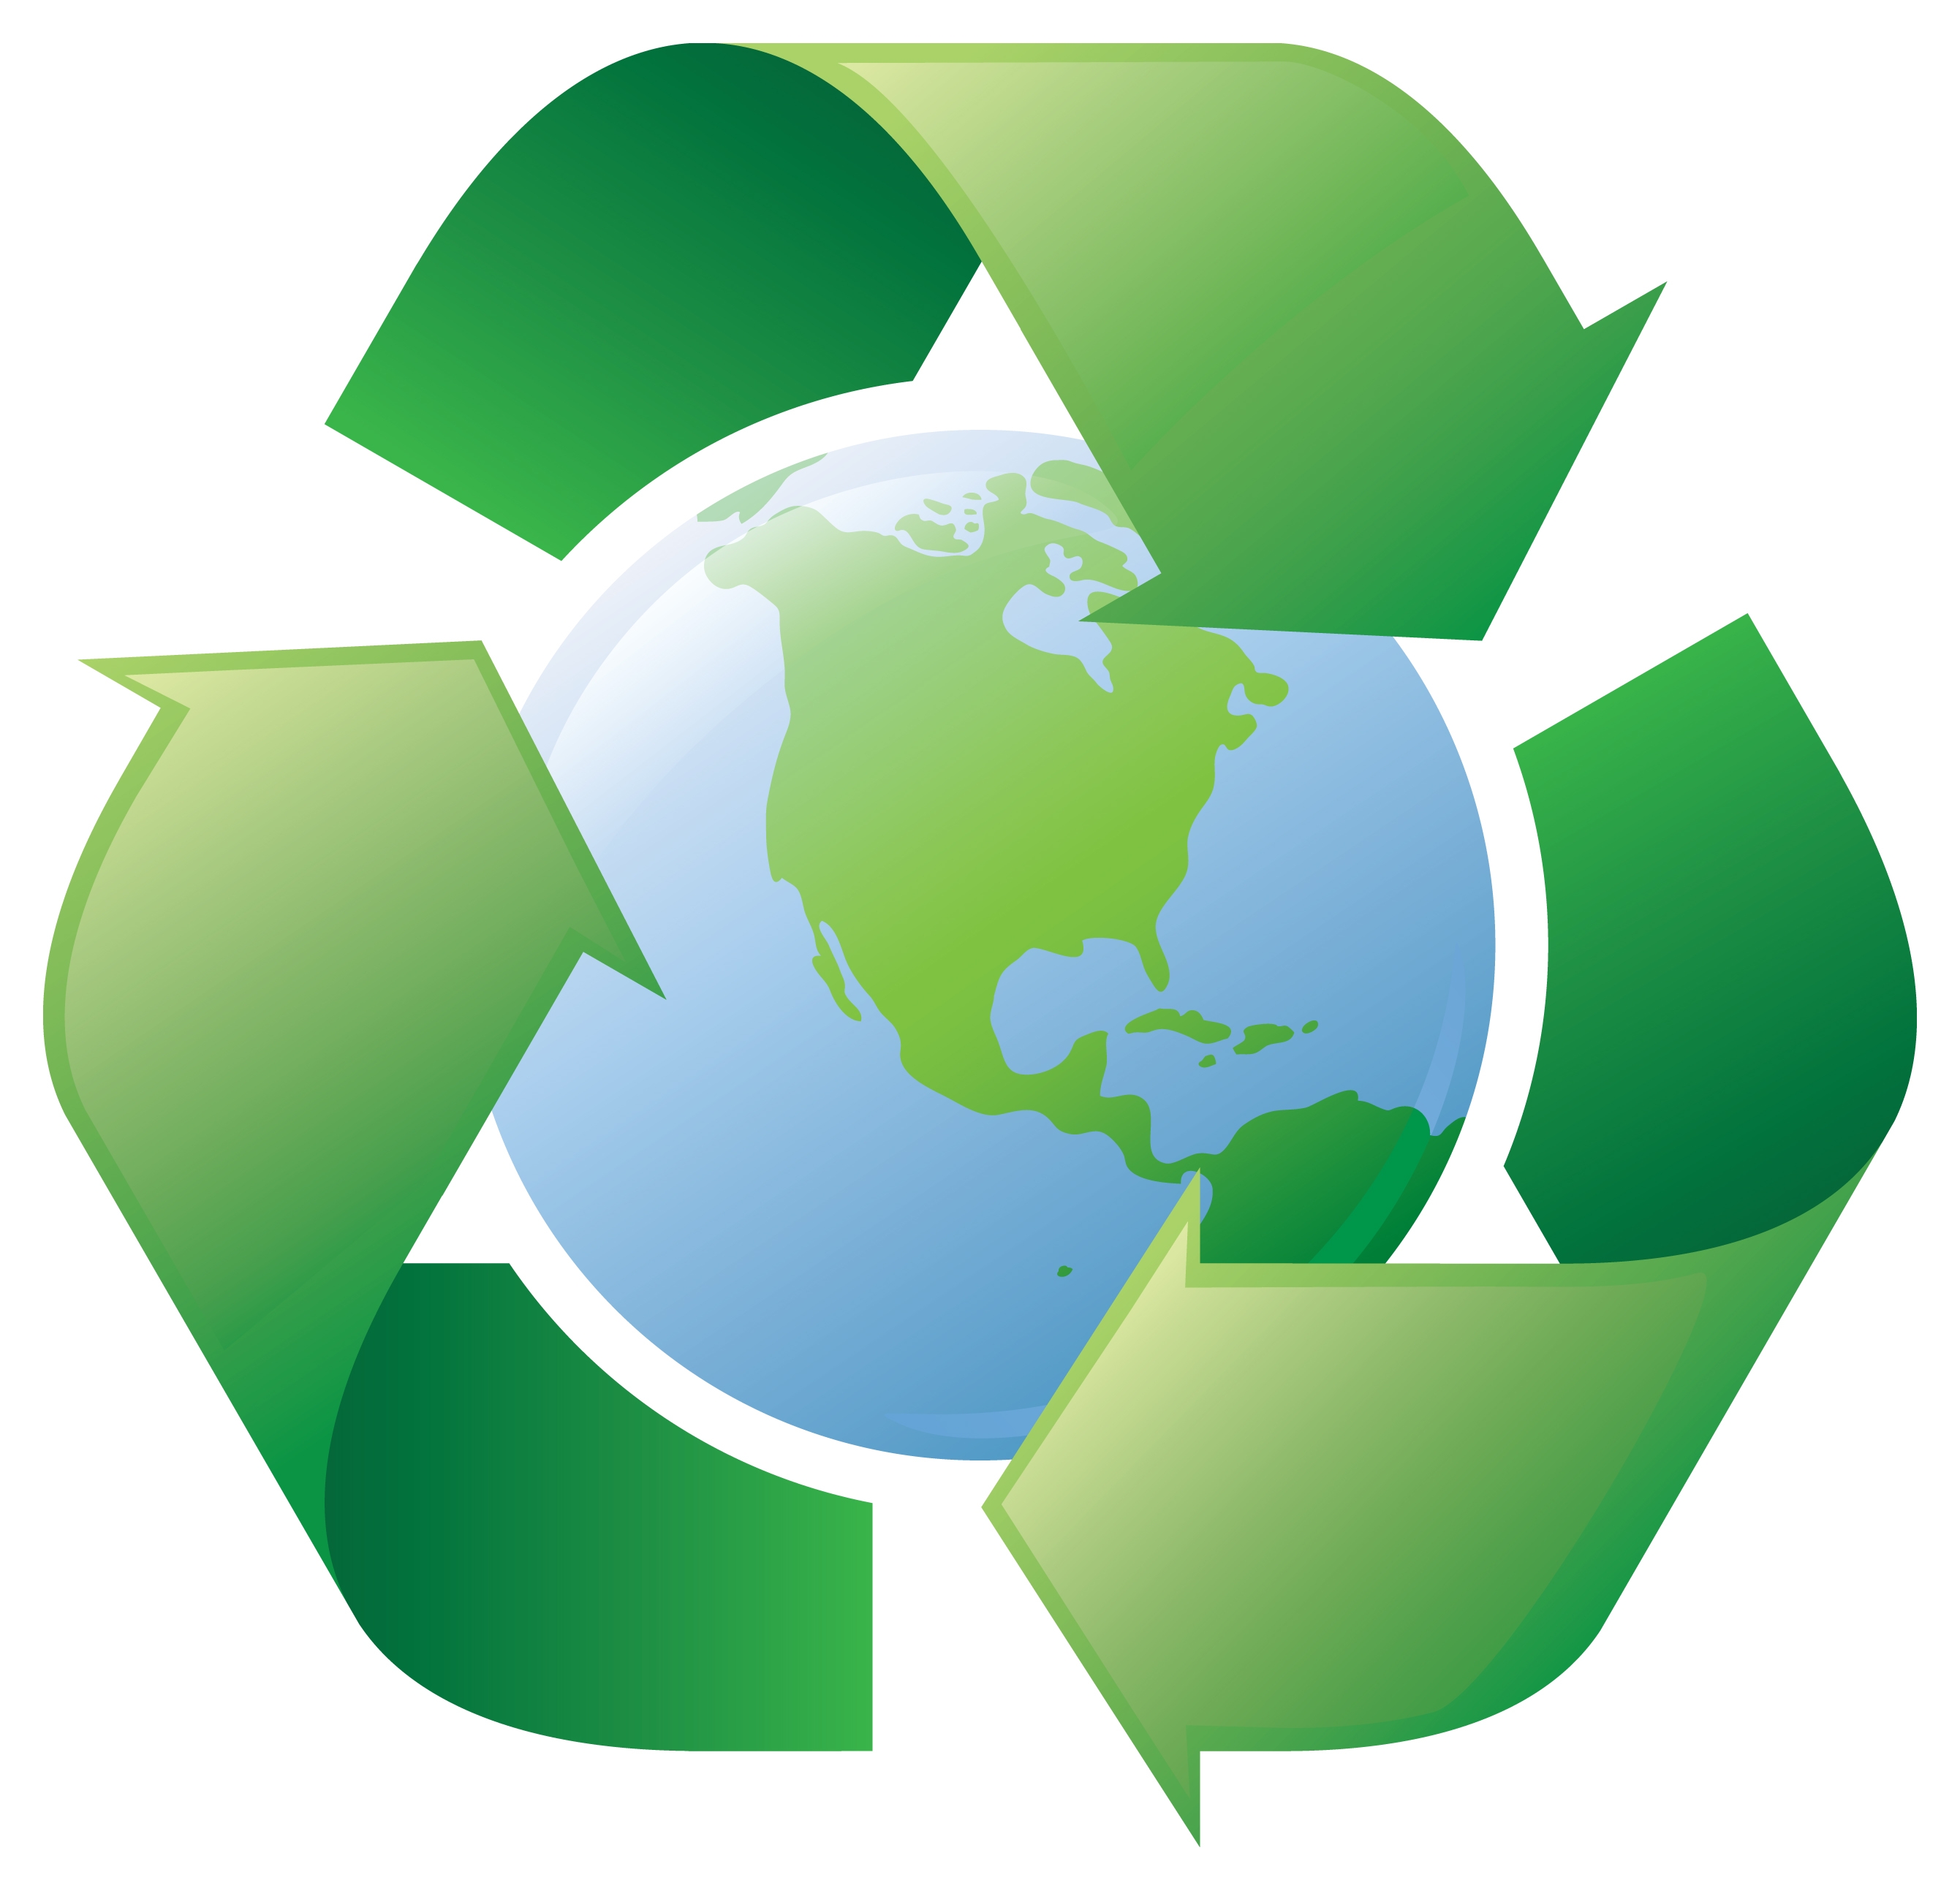 Free recycling images.